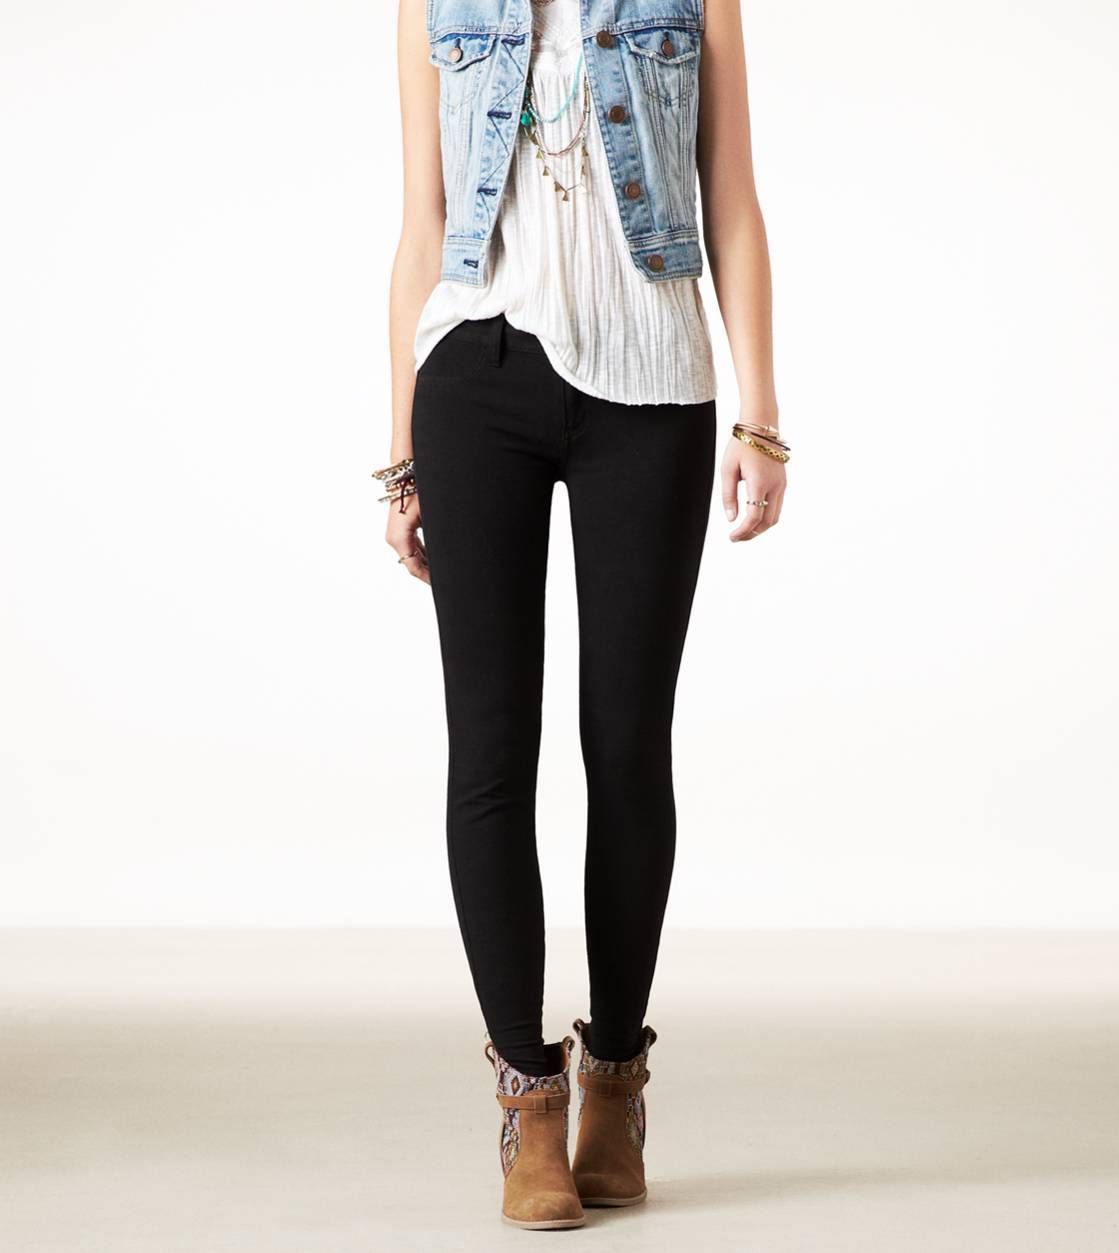 This outfit, except with jean jacket not vest, and turquoise pendant necklace. :) Great for fall.